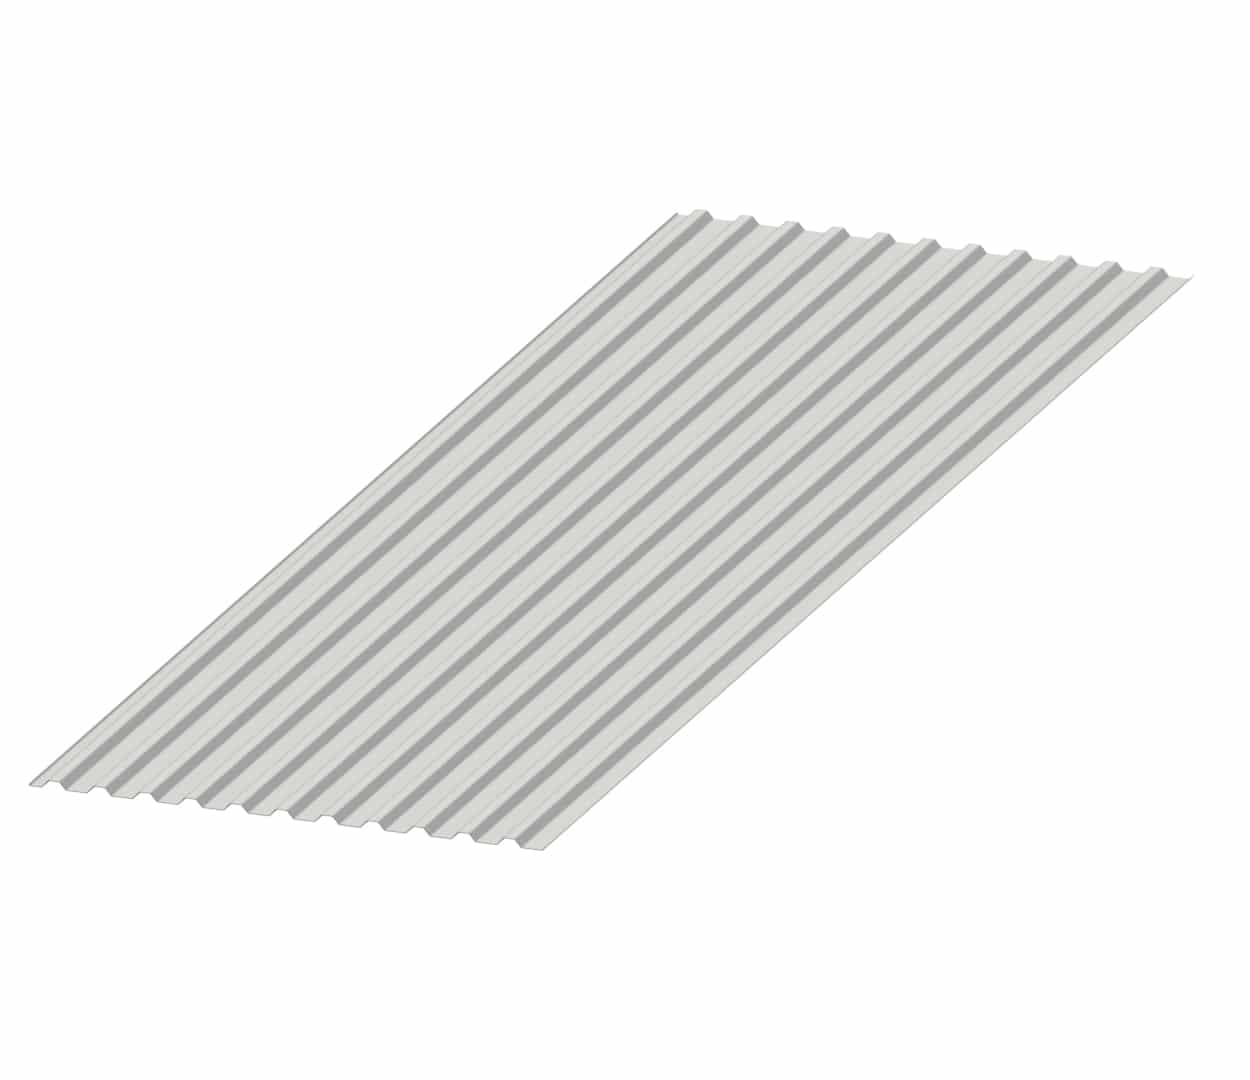 This product image shows a 9/16-inch steel form deck from ODonnell Metal Deck